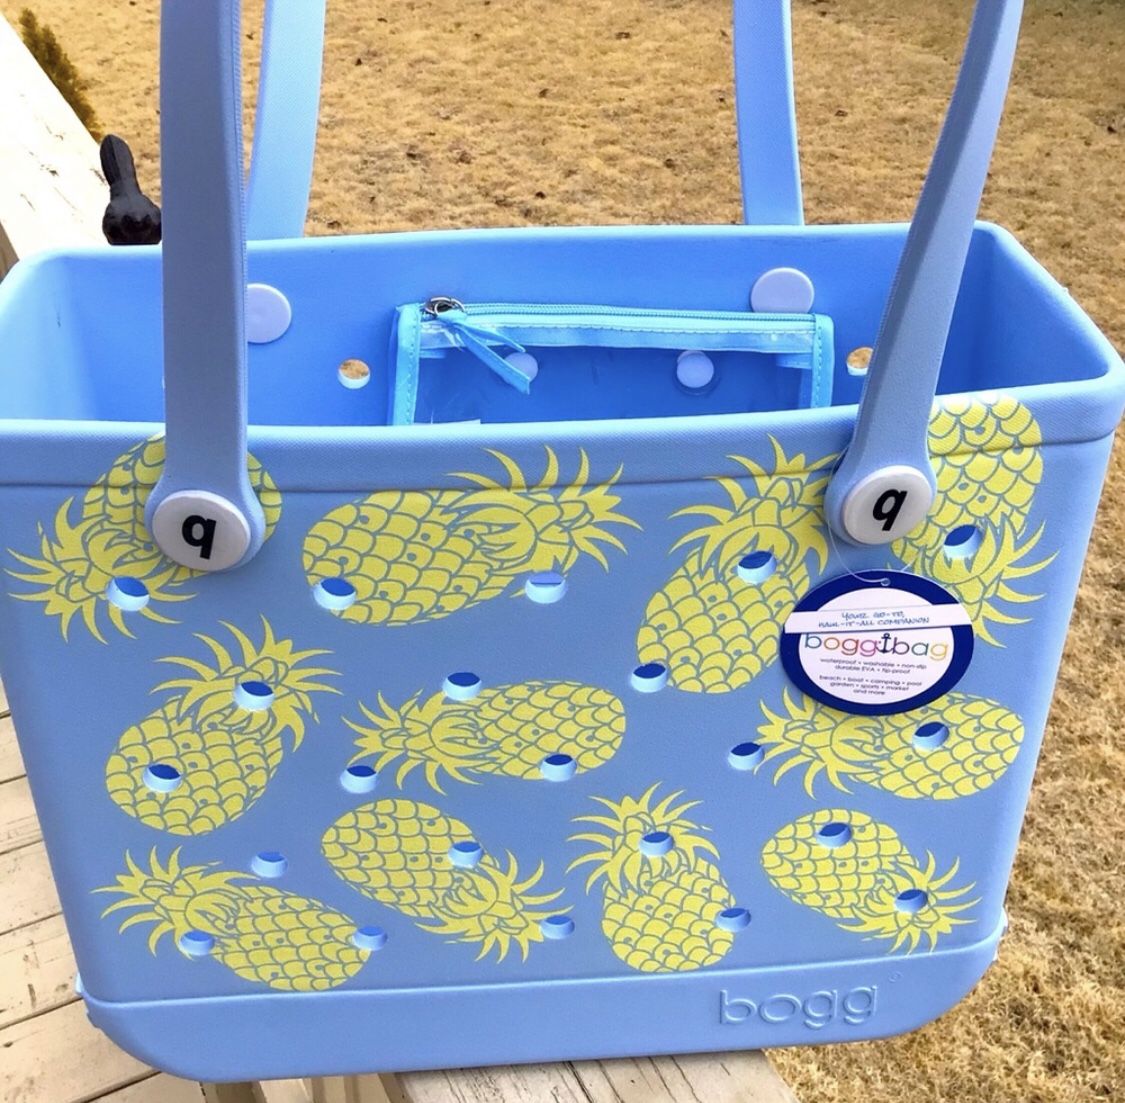 BOGG BAG LARGE - CORAL LARGE scratch as shown for Sale in Pompano Beach, FL  - OfferUp